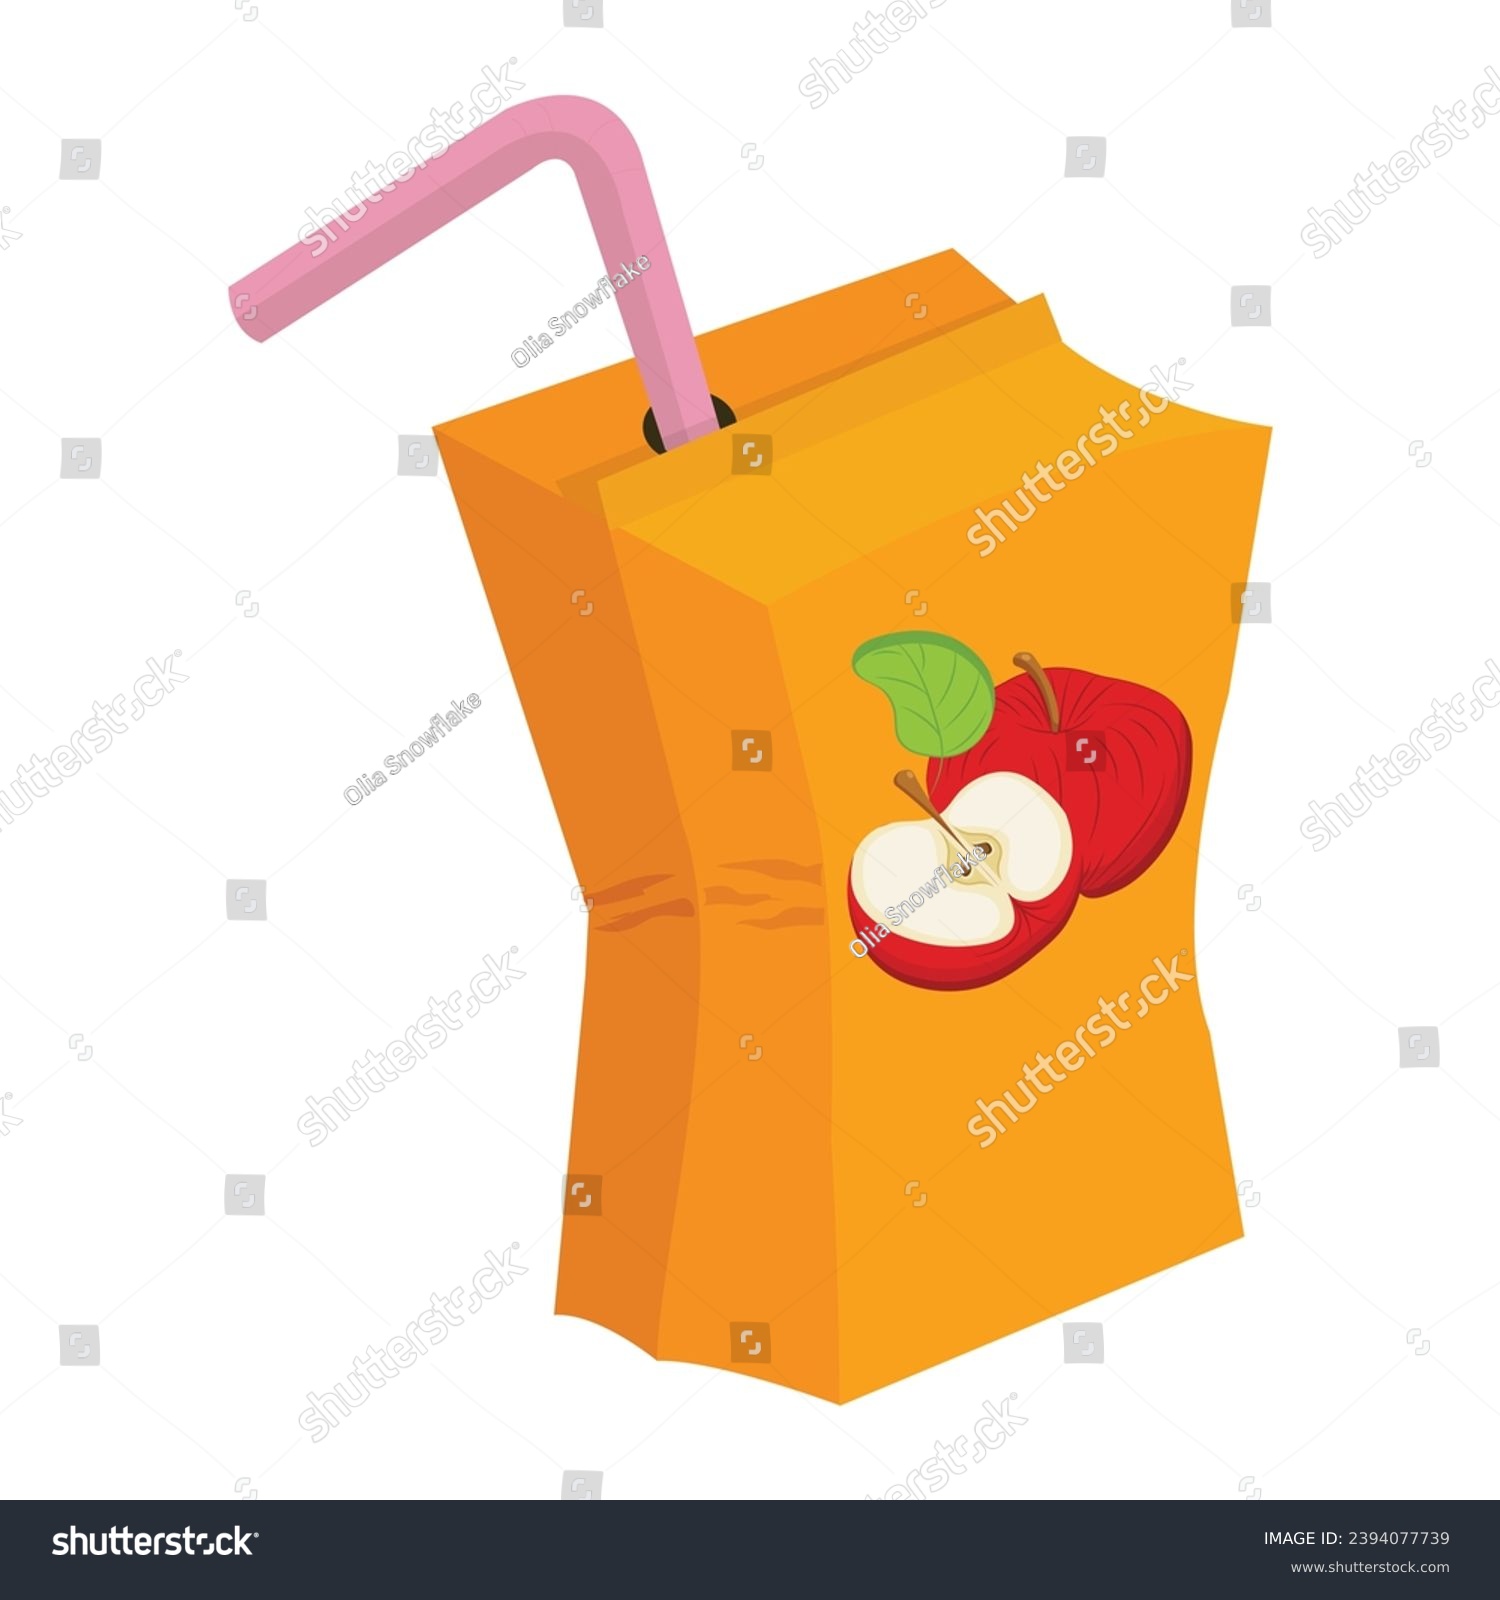 SVG of Juice box made of crumpled paper with a straw. The concept of caring for the environment, recycling waste. Vector illustration in cartoon style isolated on white background. svg